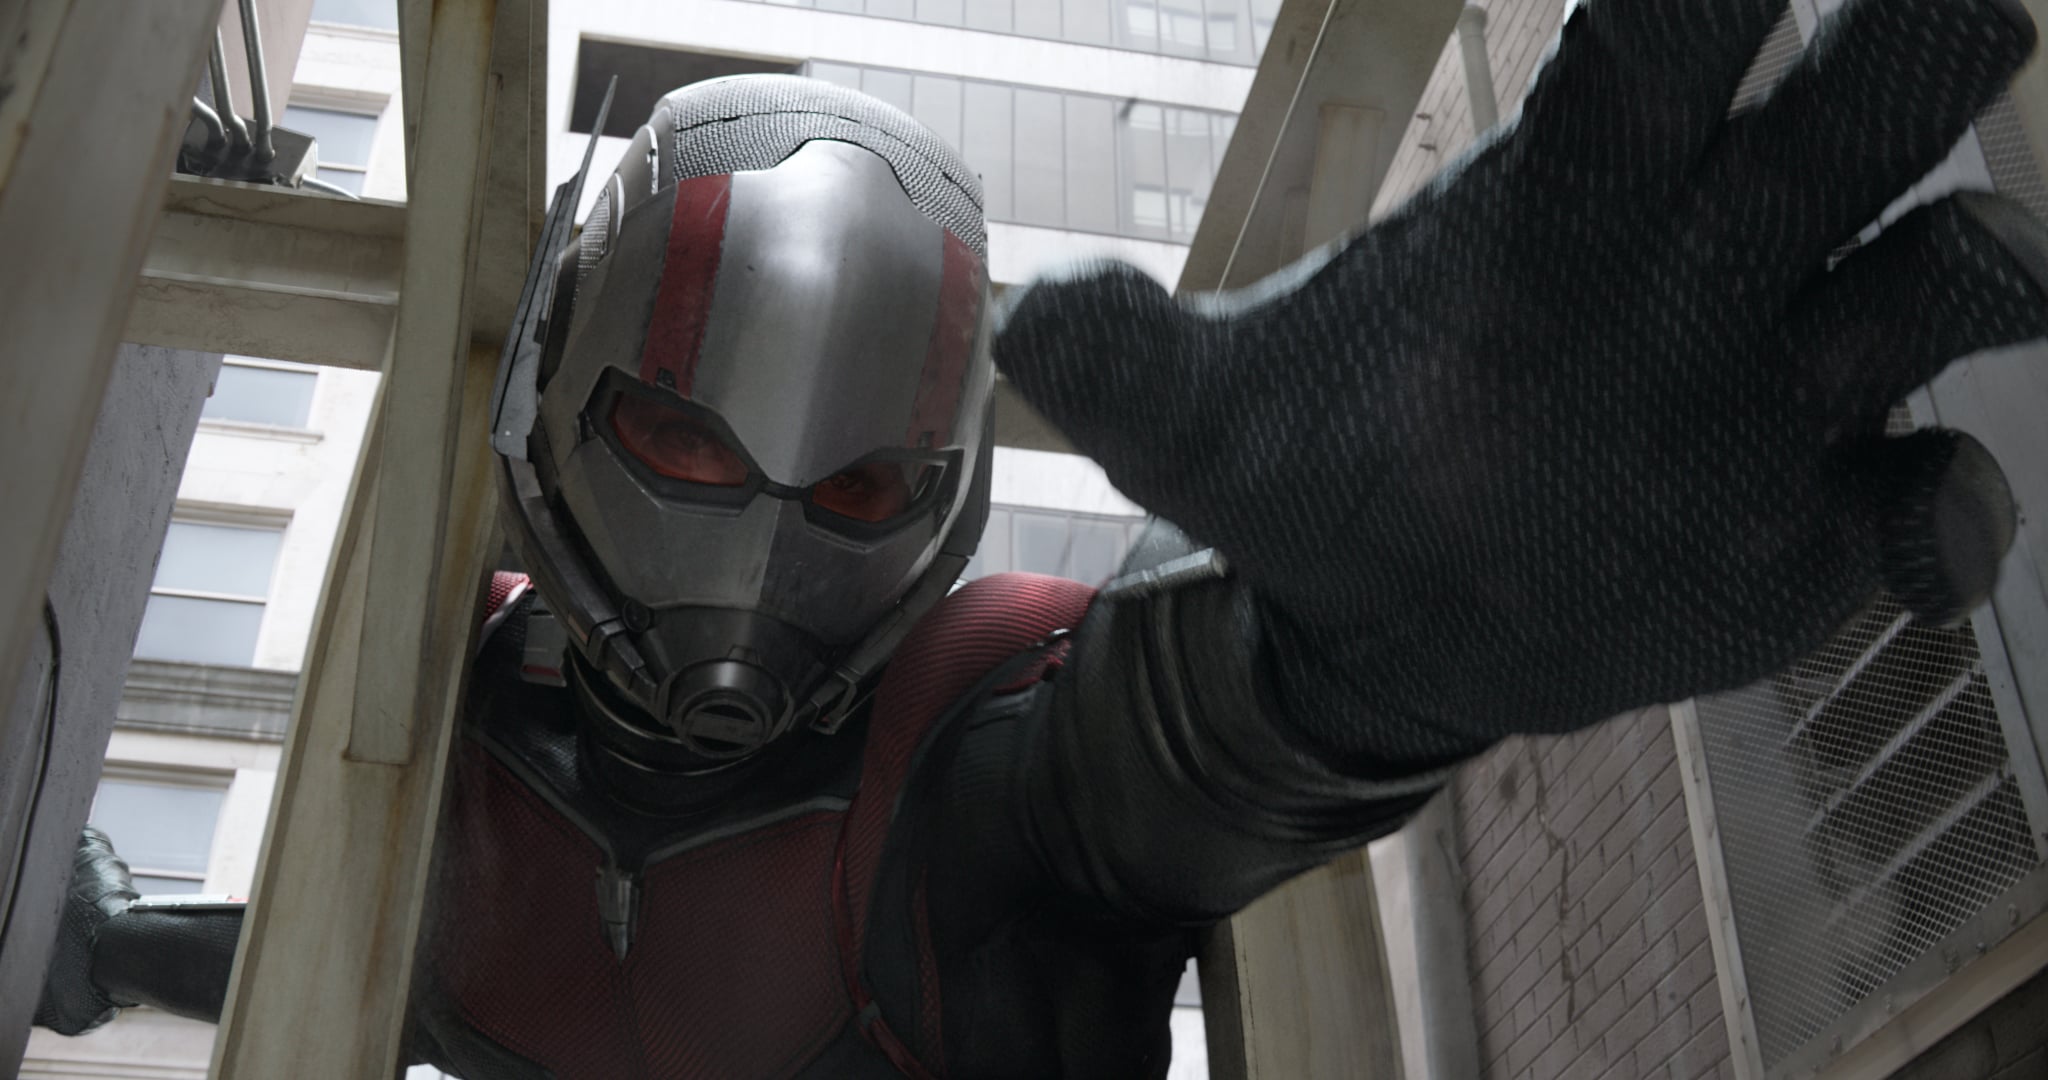 What Happened With Ant Man And The Avengers In Germany?